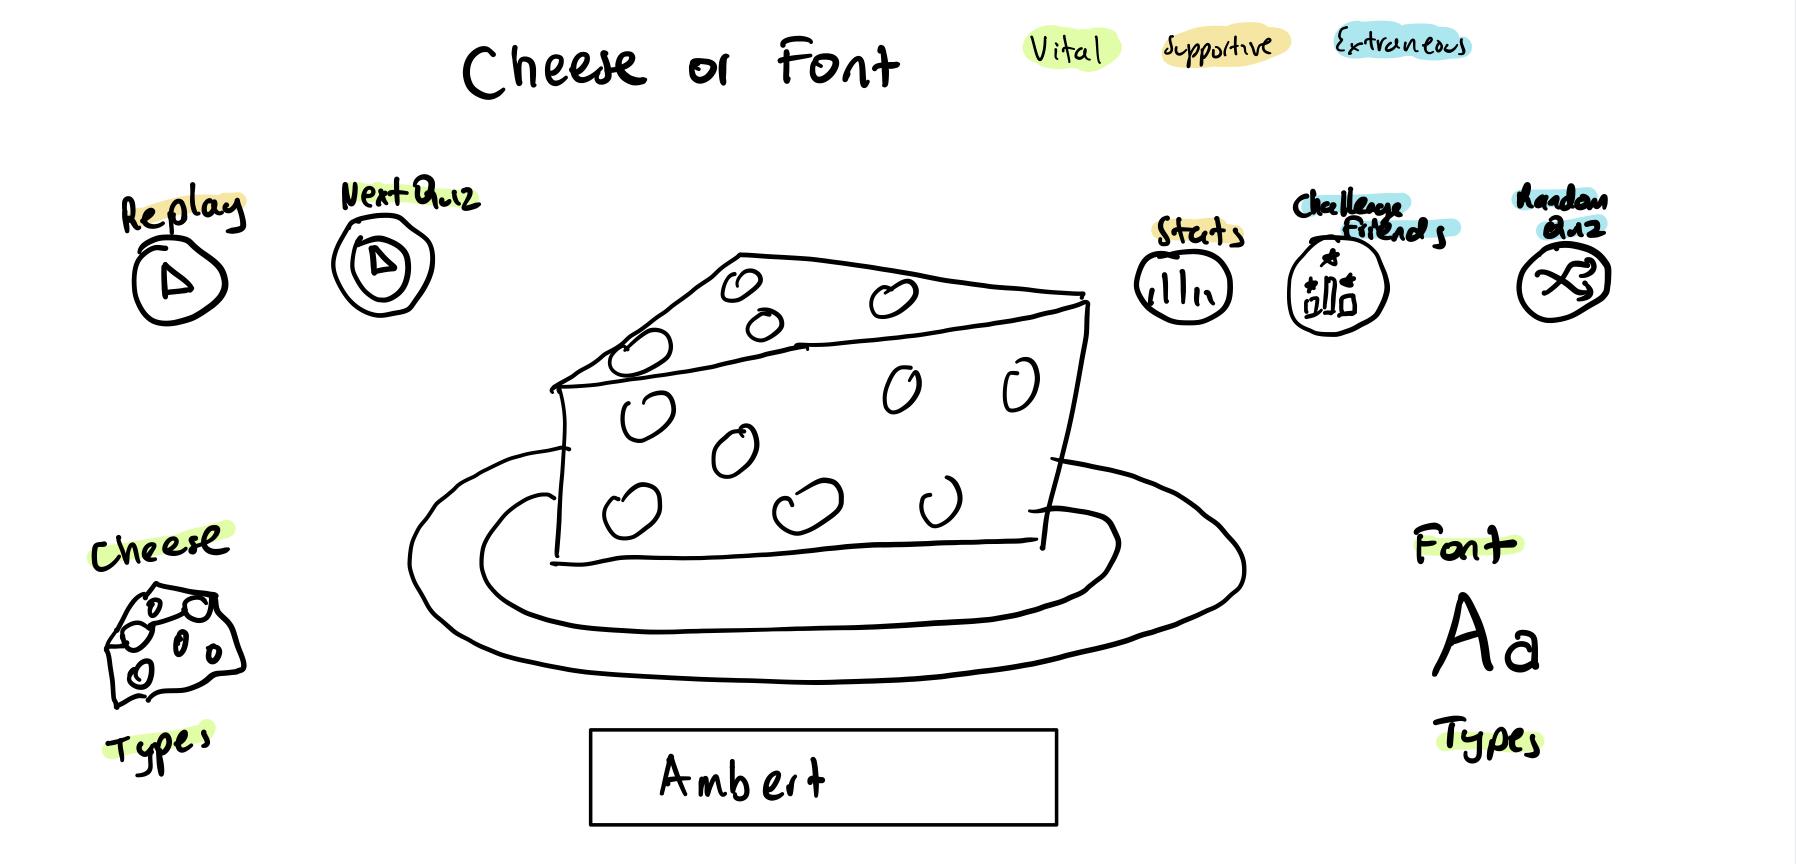 Skechnote of Cheese or Font